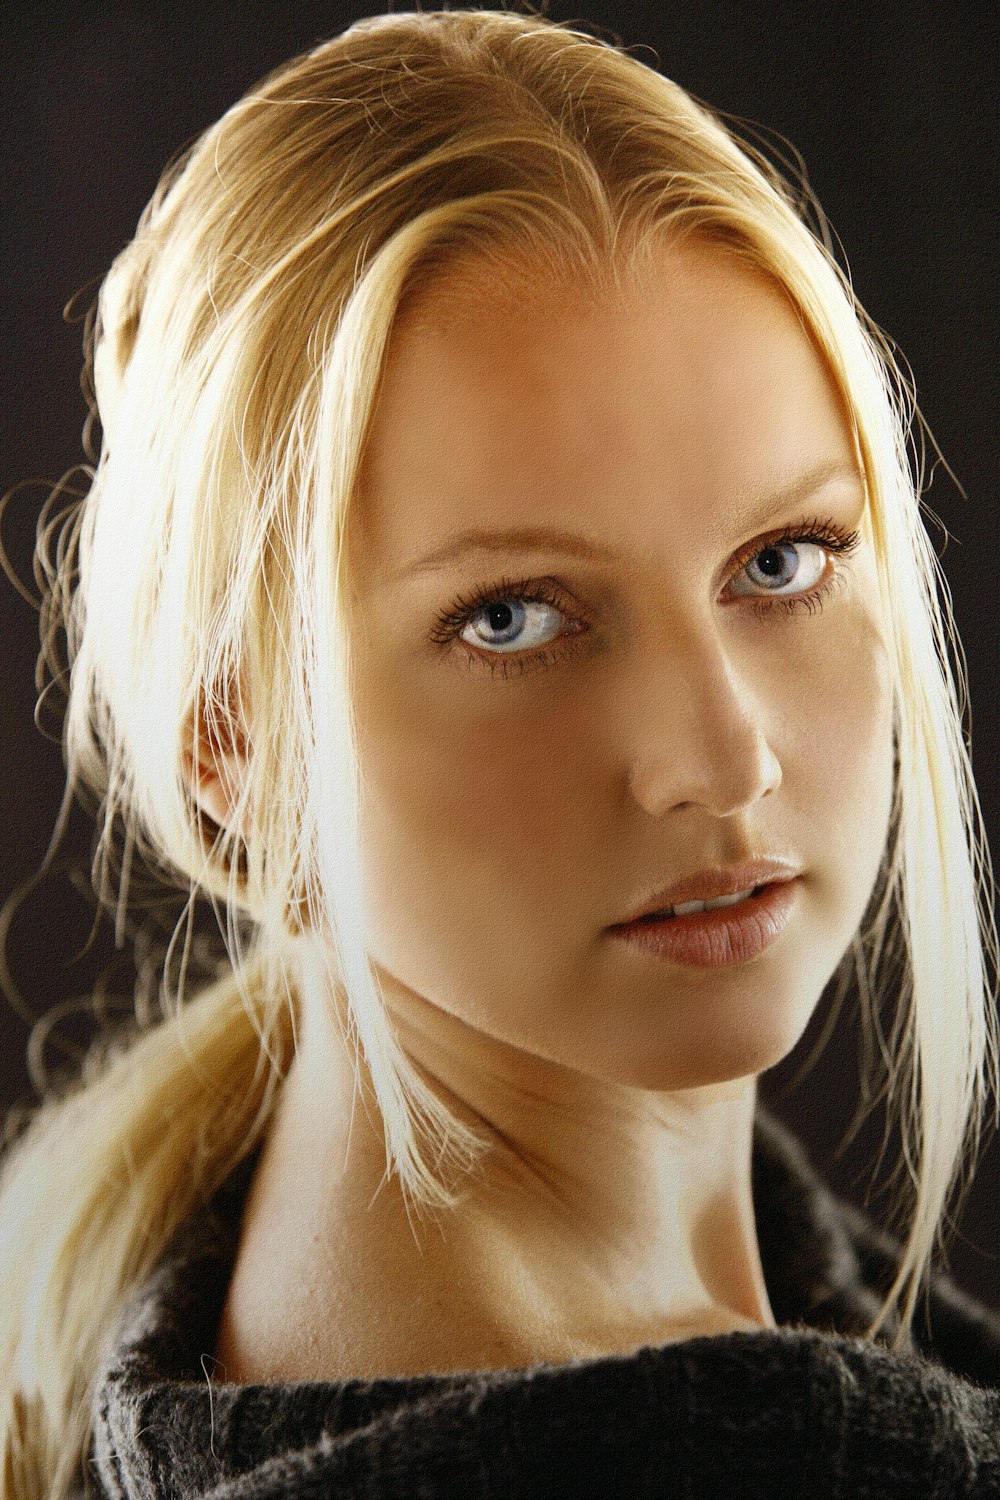 woman with blonde hair and white shirt